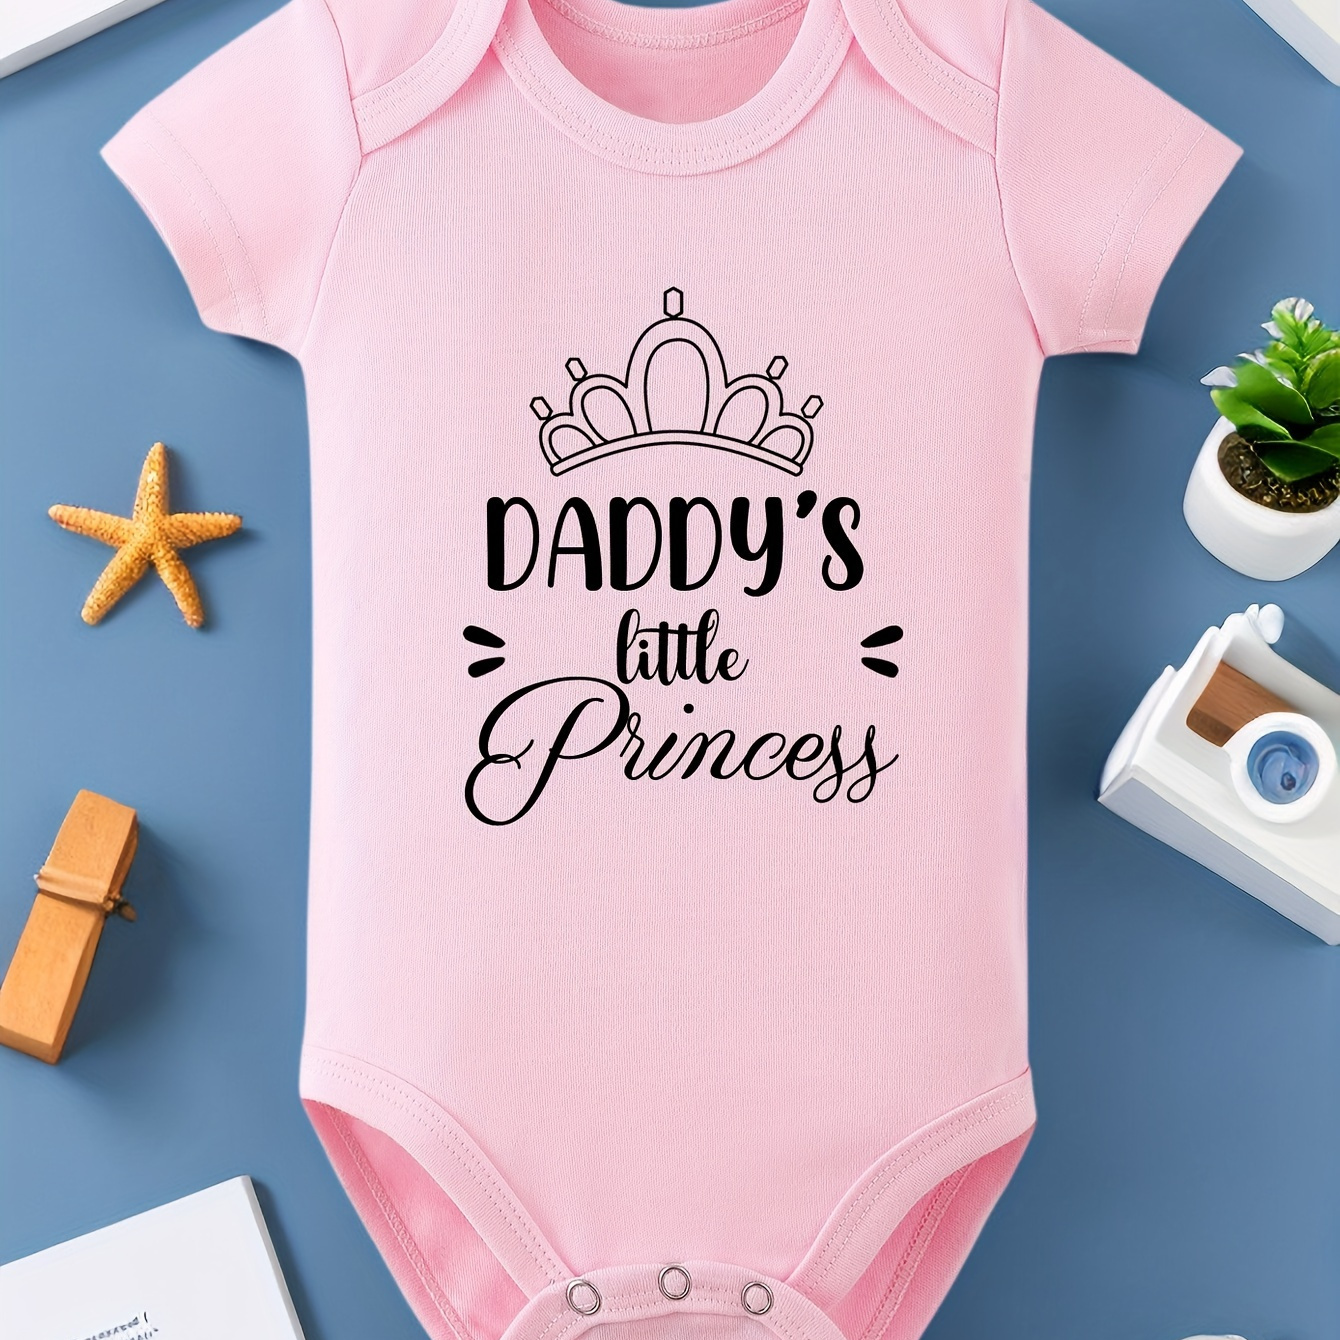 

Baby's "daddy's Little Princess" Print Cotton Triangle Bodysuit, Comfy Casual Short Sleeve Romper, Toddler & Infant Girl's Onesie For Summer, As Gift